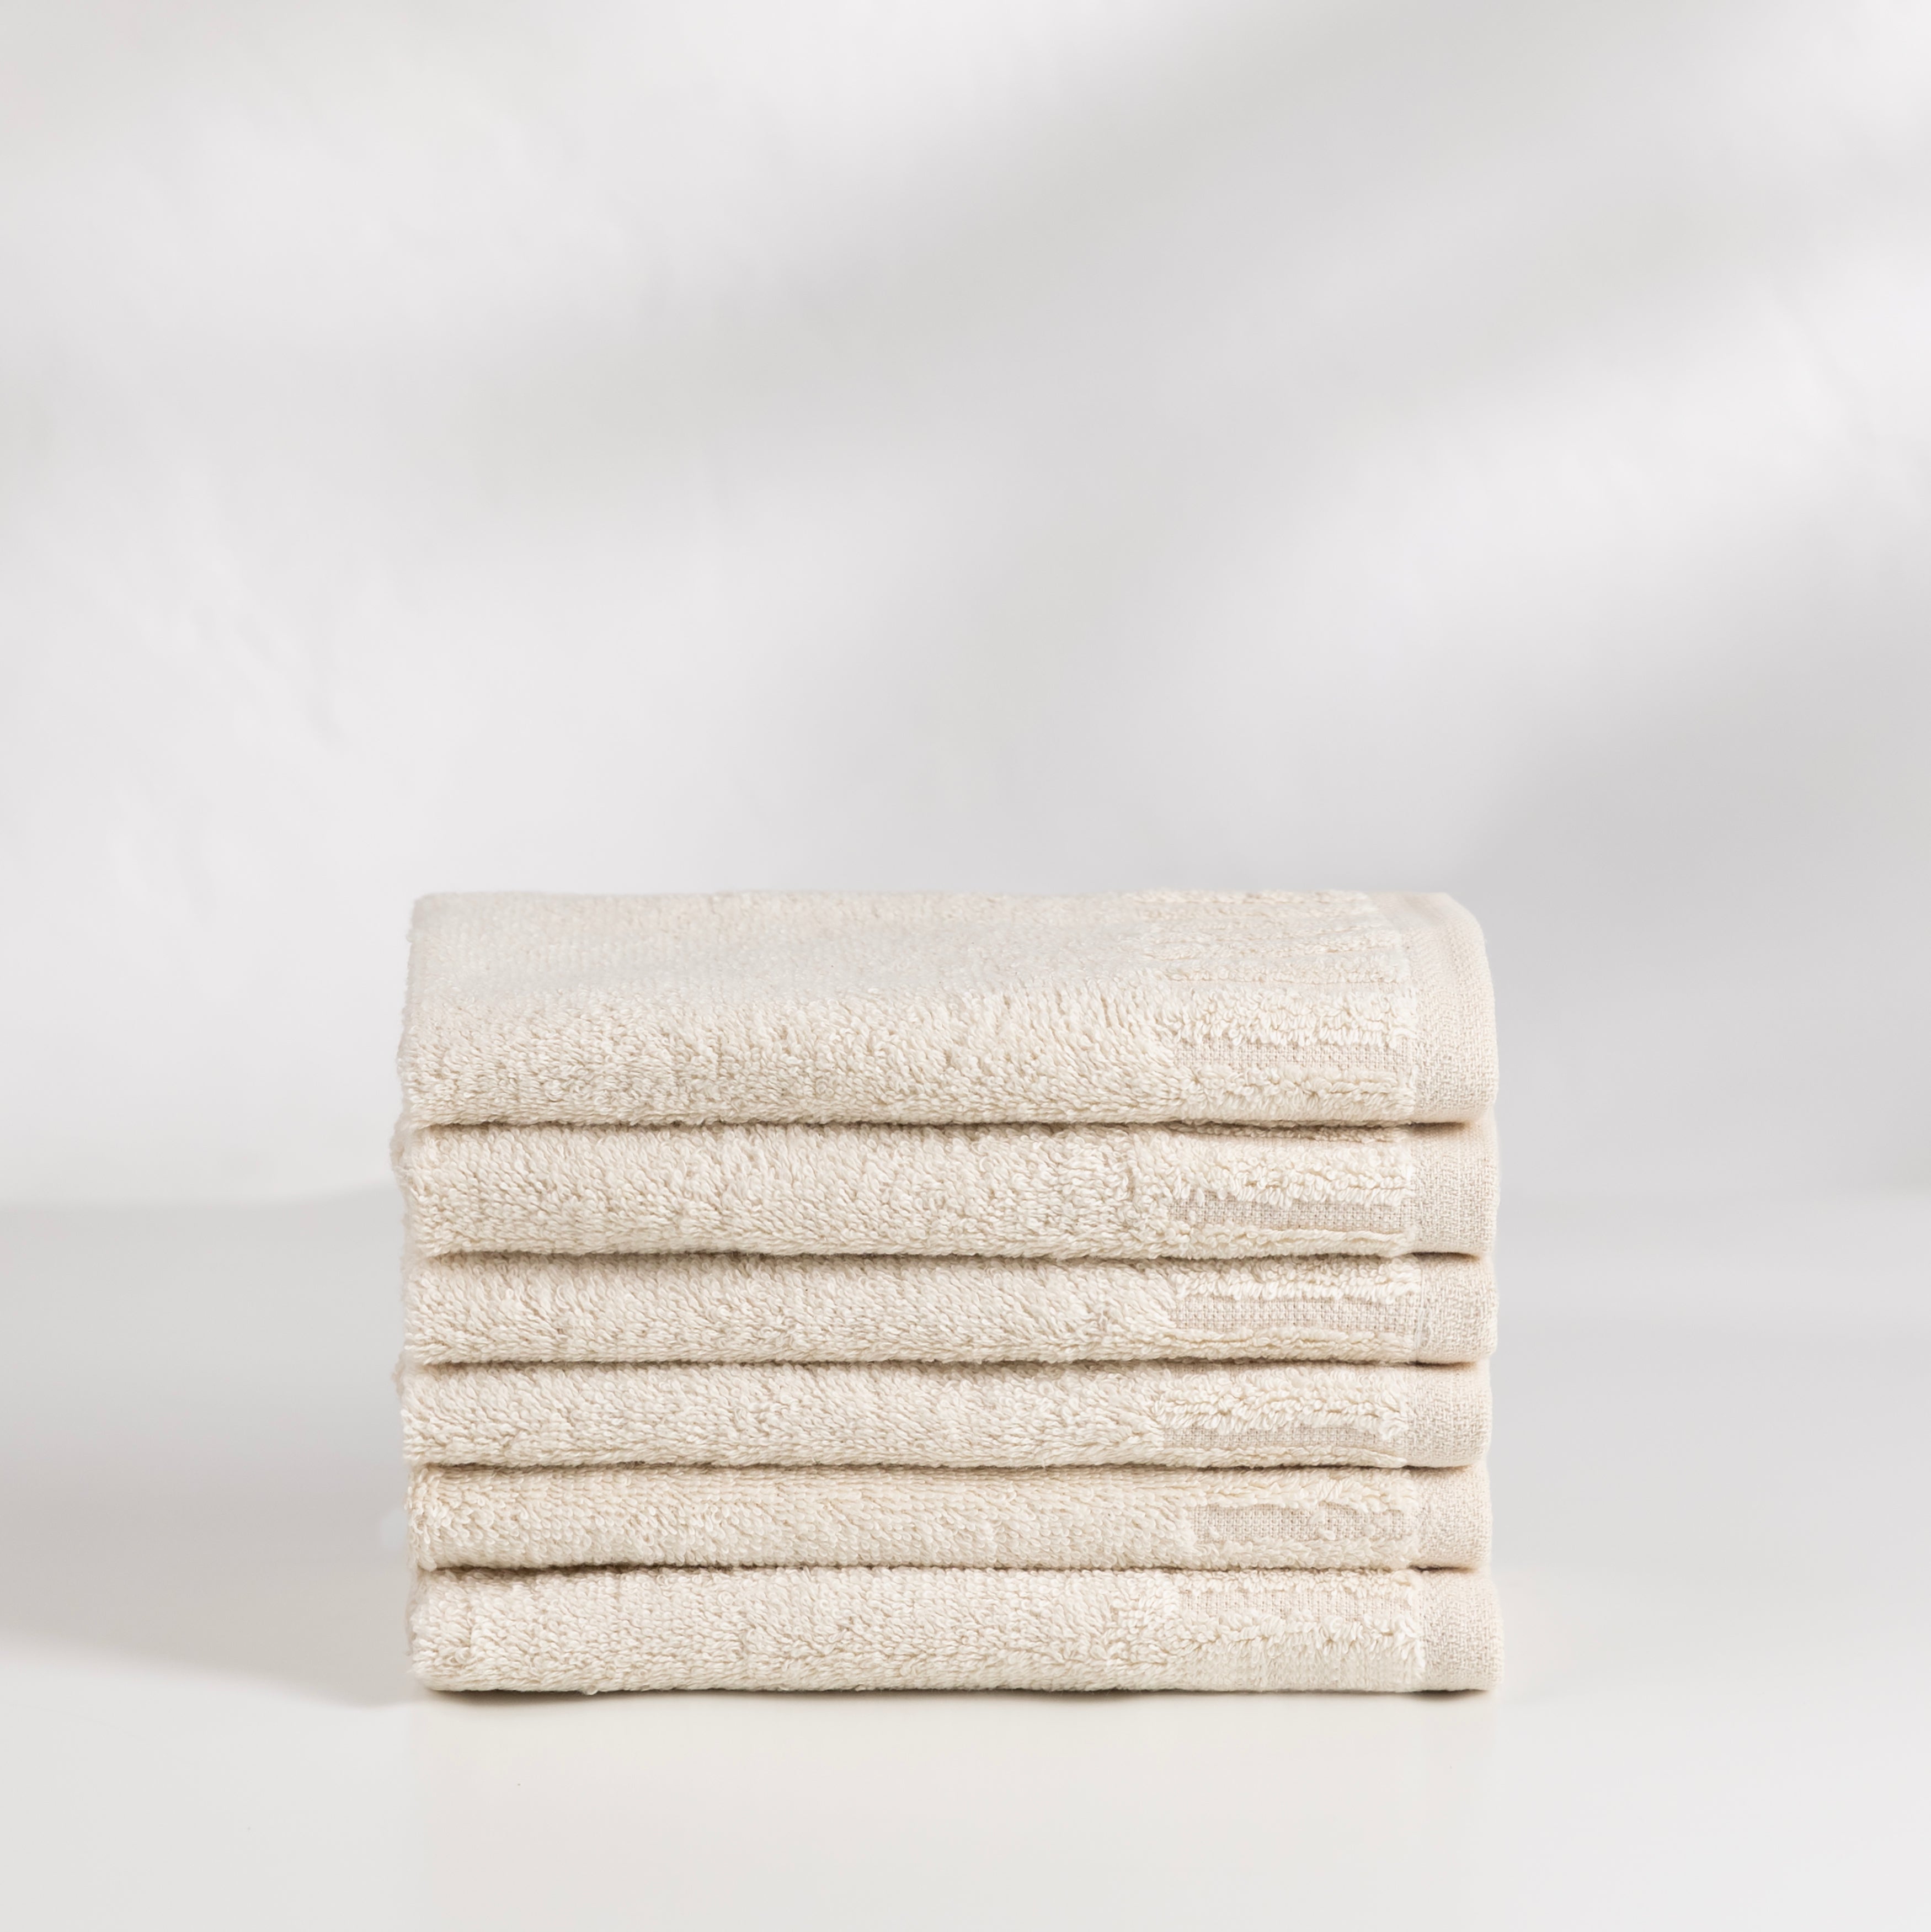 Sobel Westex 100% Cotton Hotel Style White Hand Towels 16 X 30” Pack Of 6  NEW